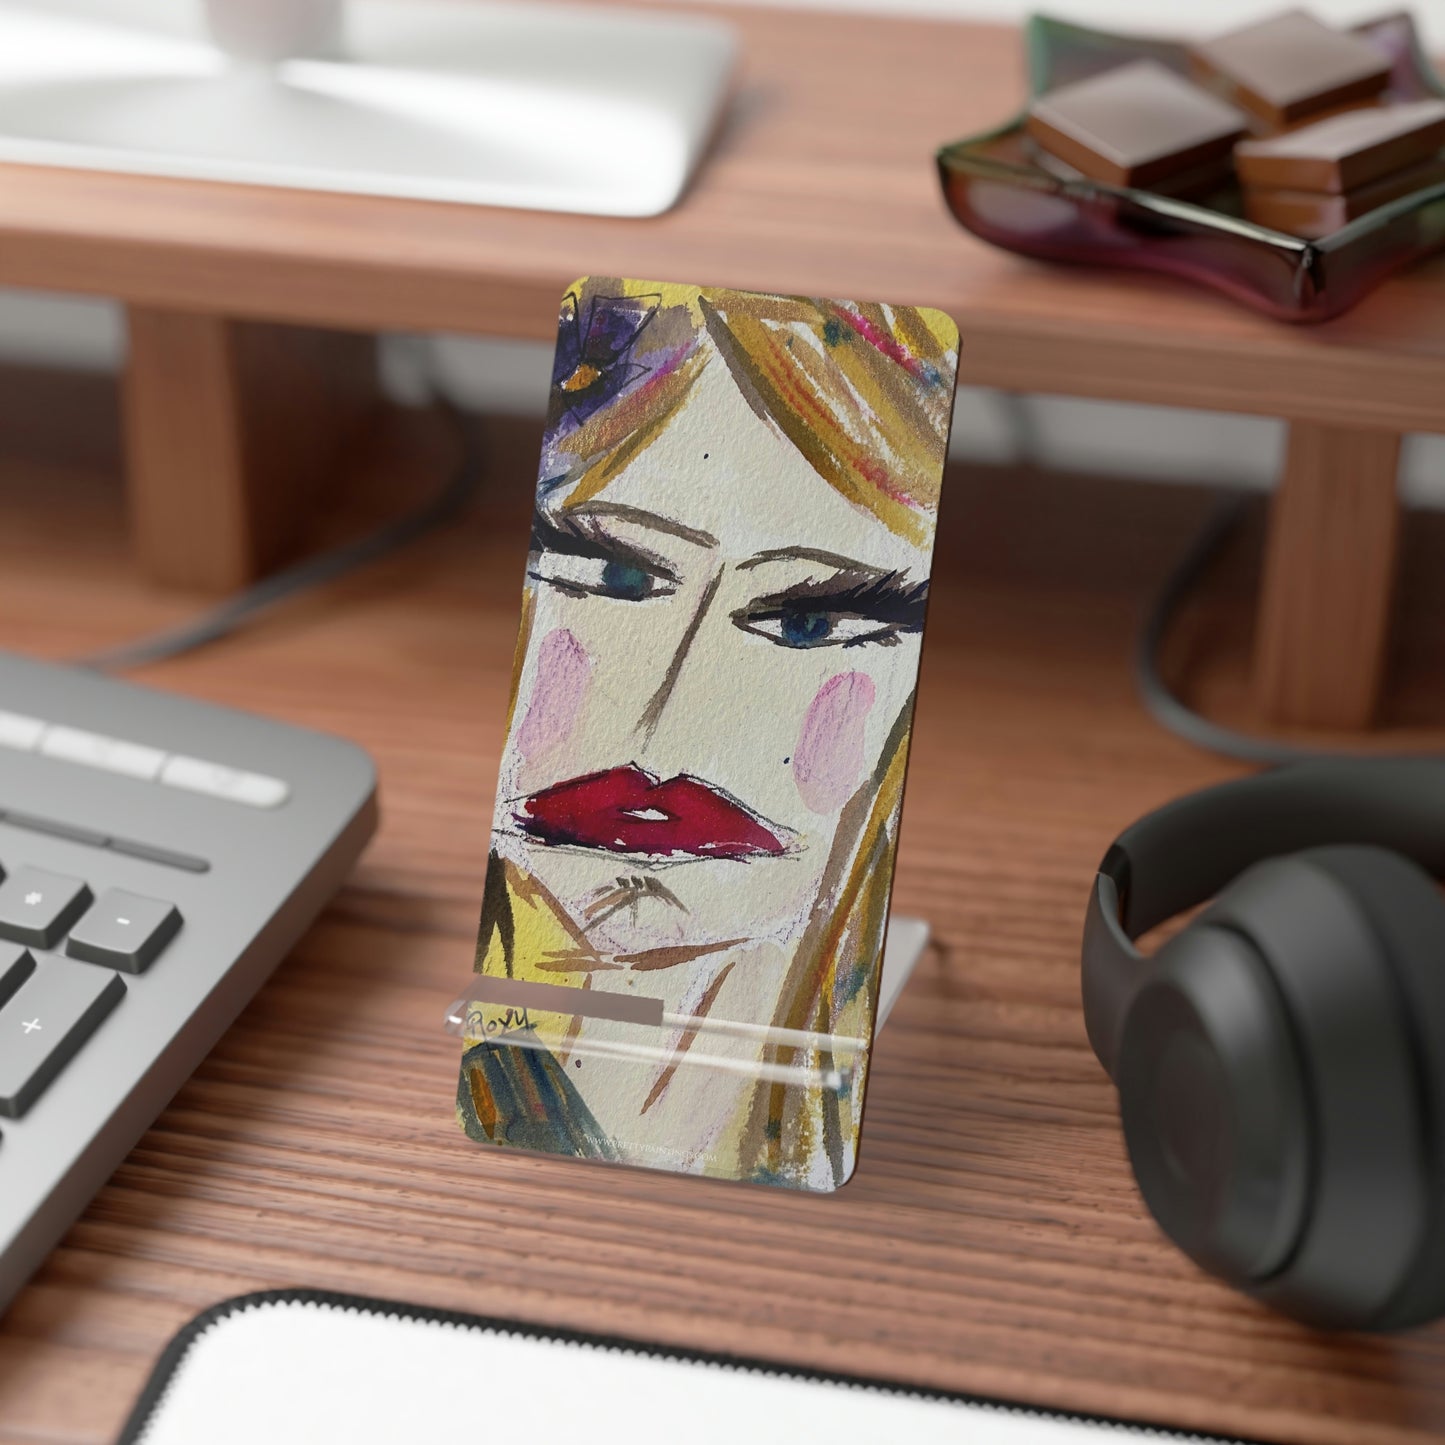 Moody Blonde "Whatever" Phone Stand